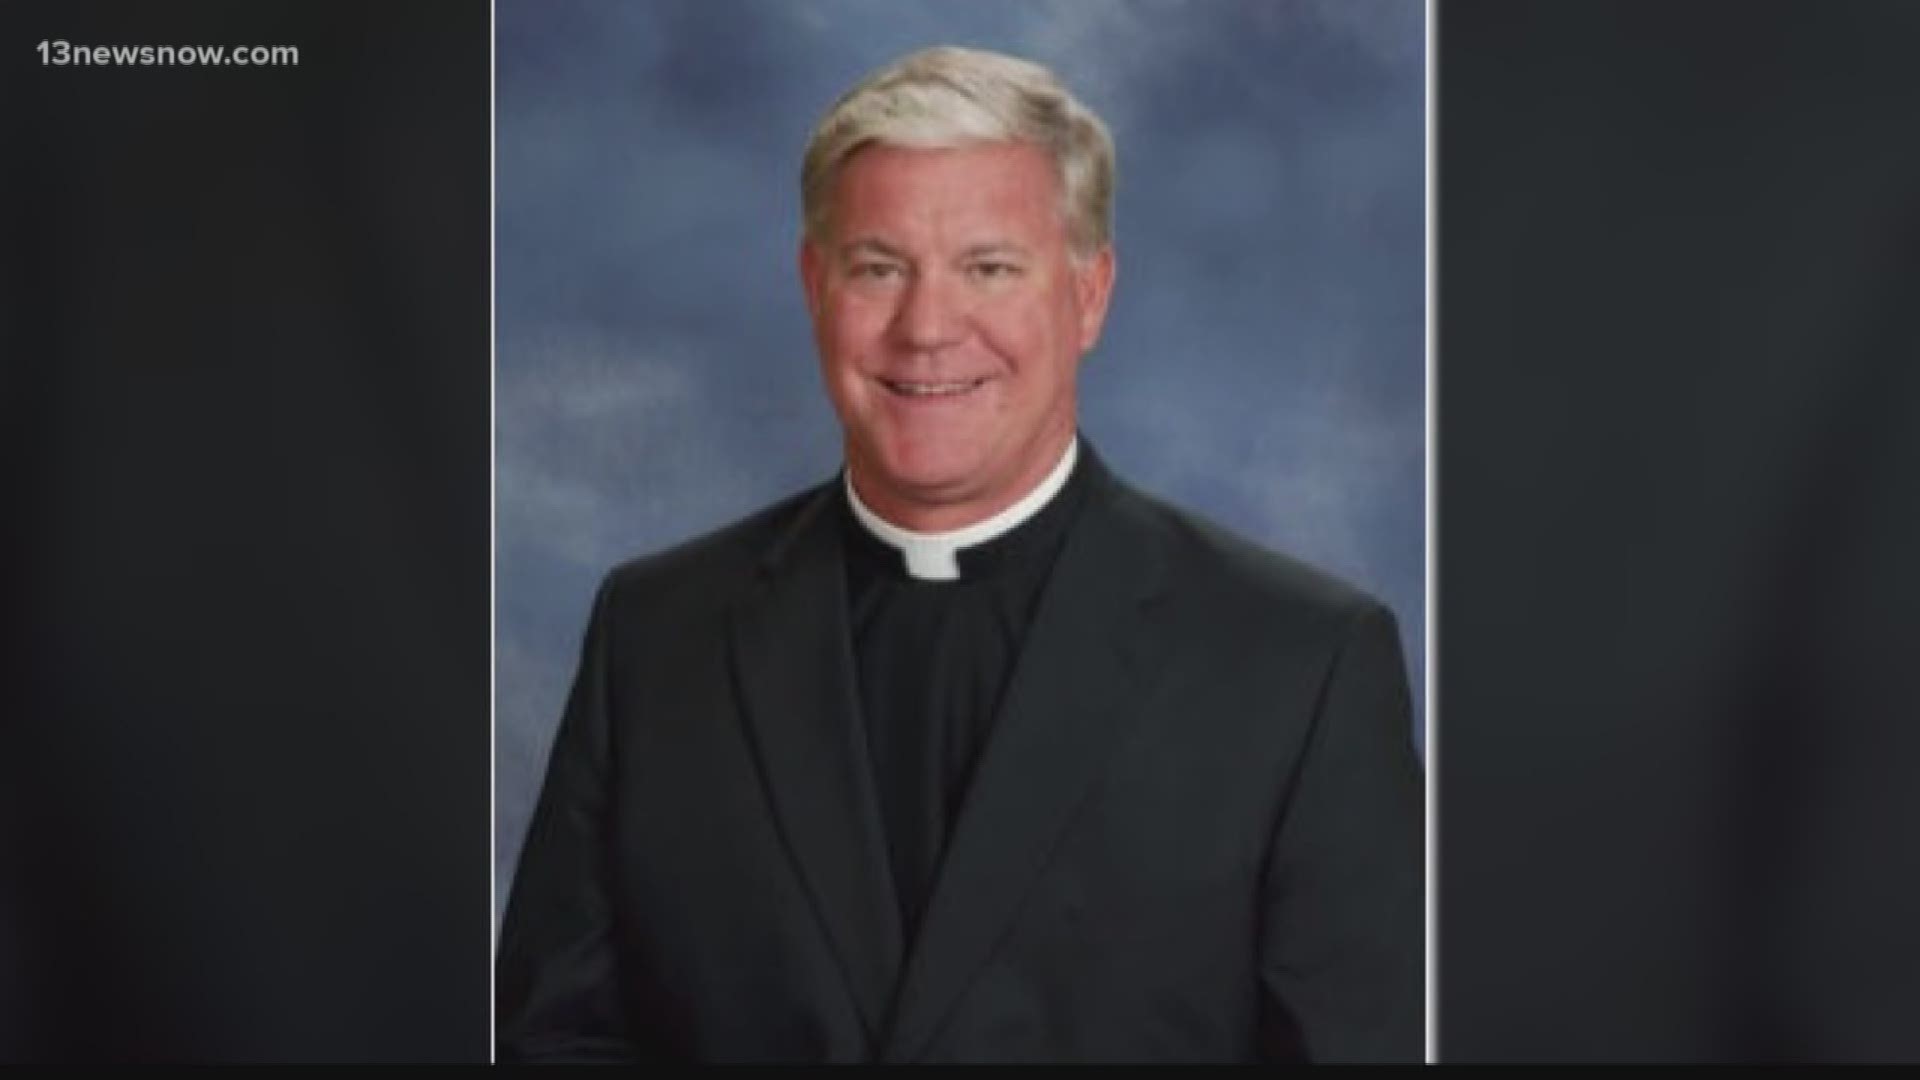 A Norfolk priest is on leave after accused of violating a code of conduct.